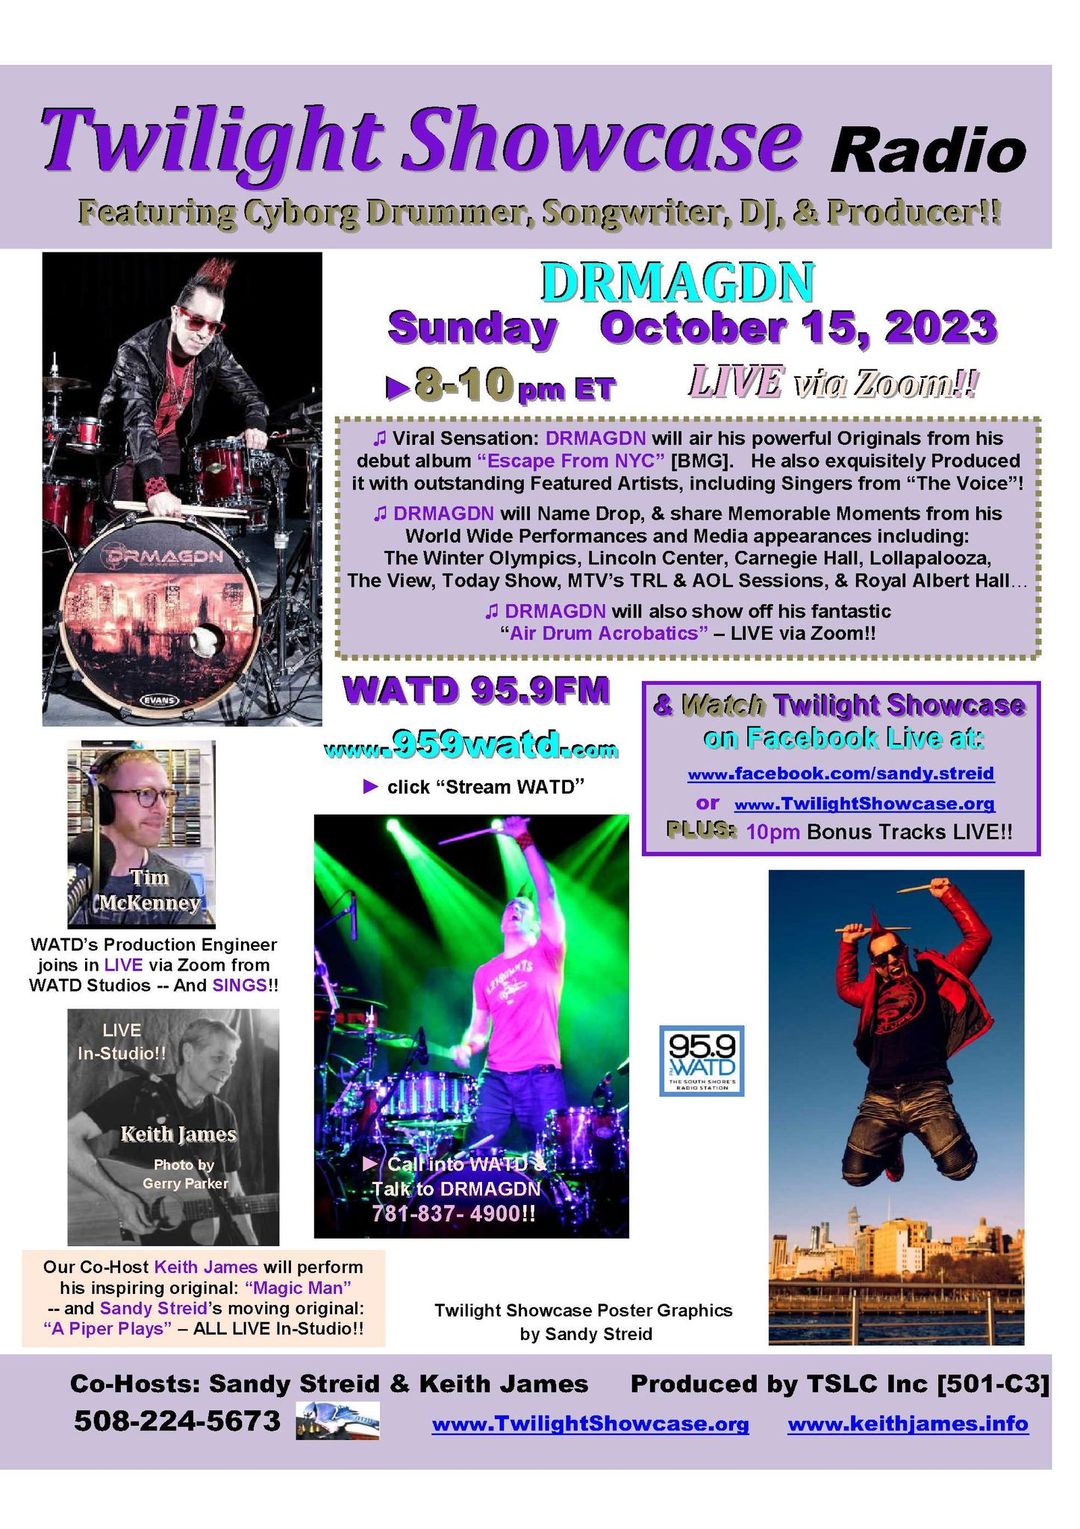 DRMAGDN To Guest On 95.9 WATD FM’s Twilight Showcase Radio Sunday, October 15th, 2023 8-10 PM ET